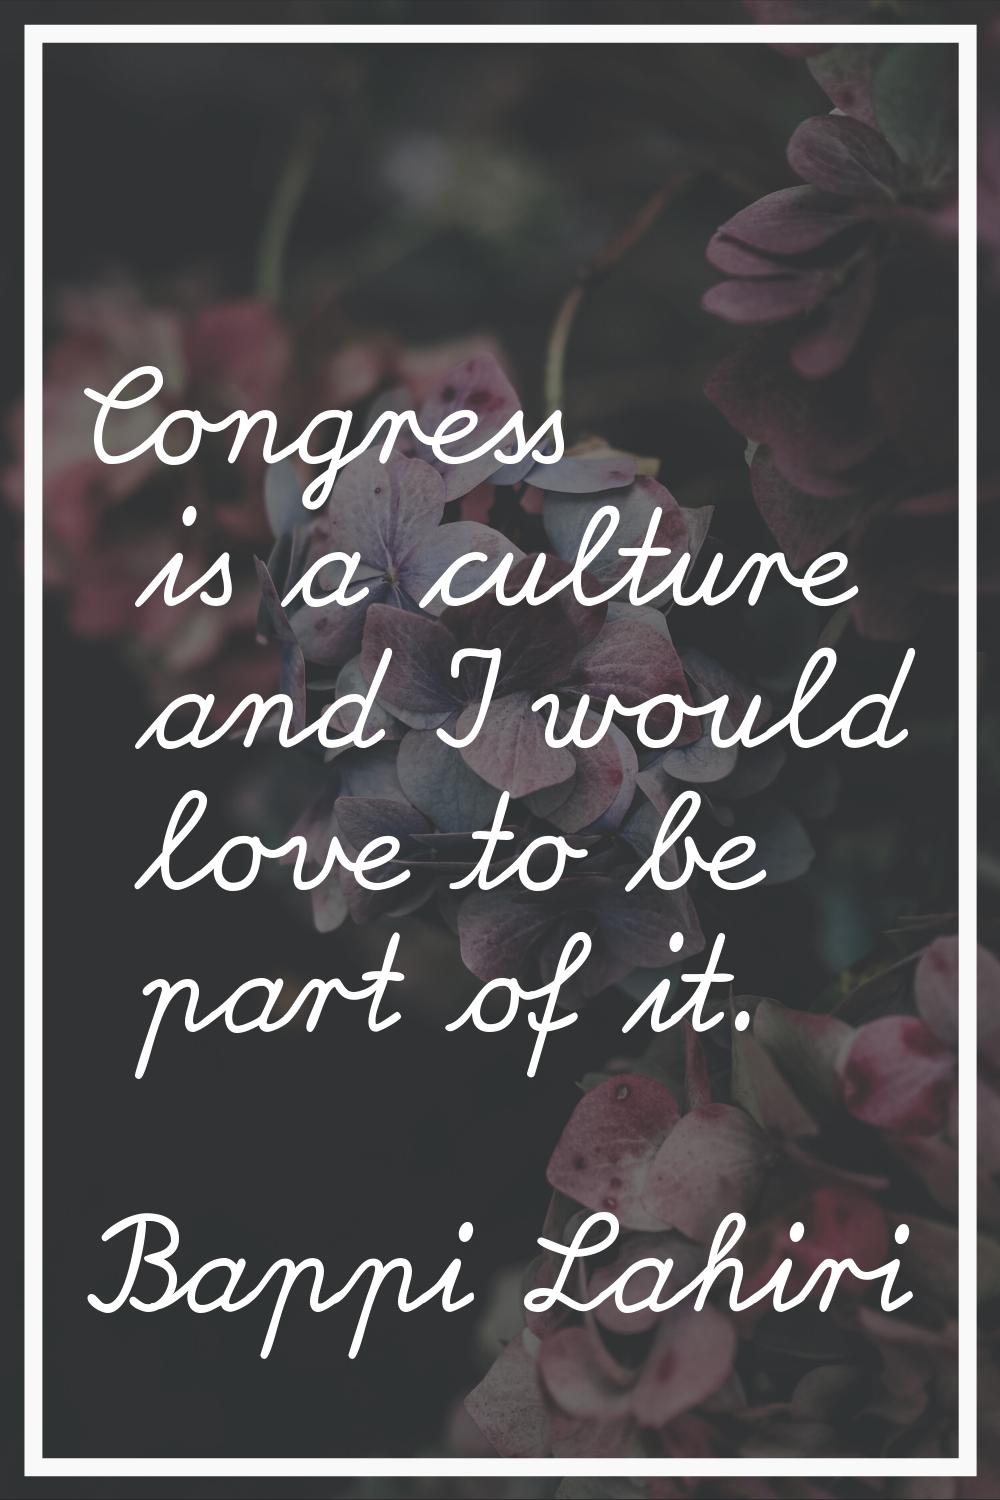 Congress is a culture and I would love to be part of it.